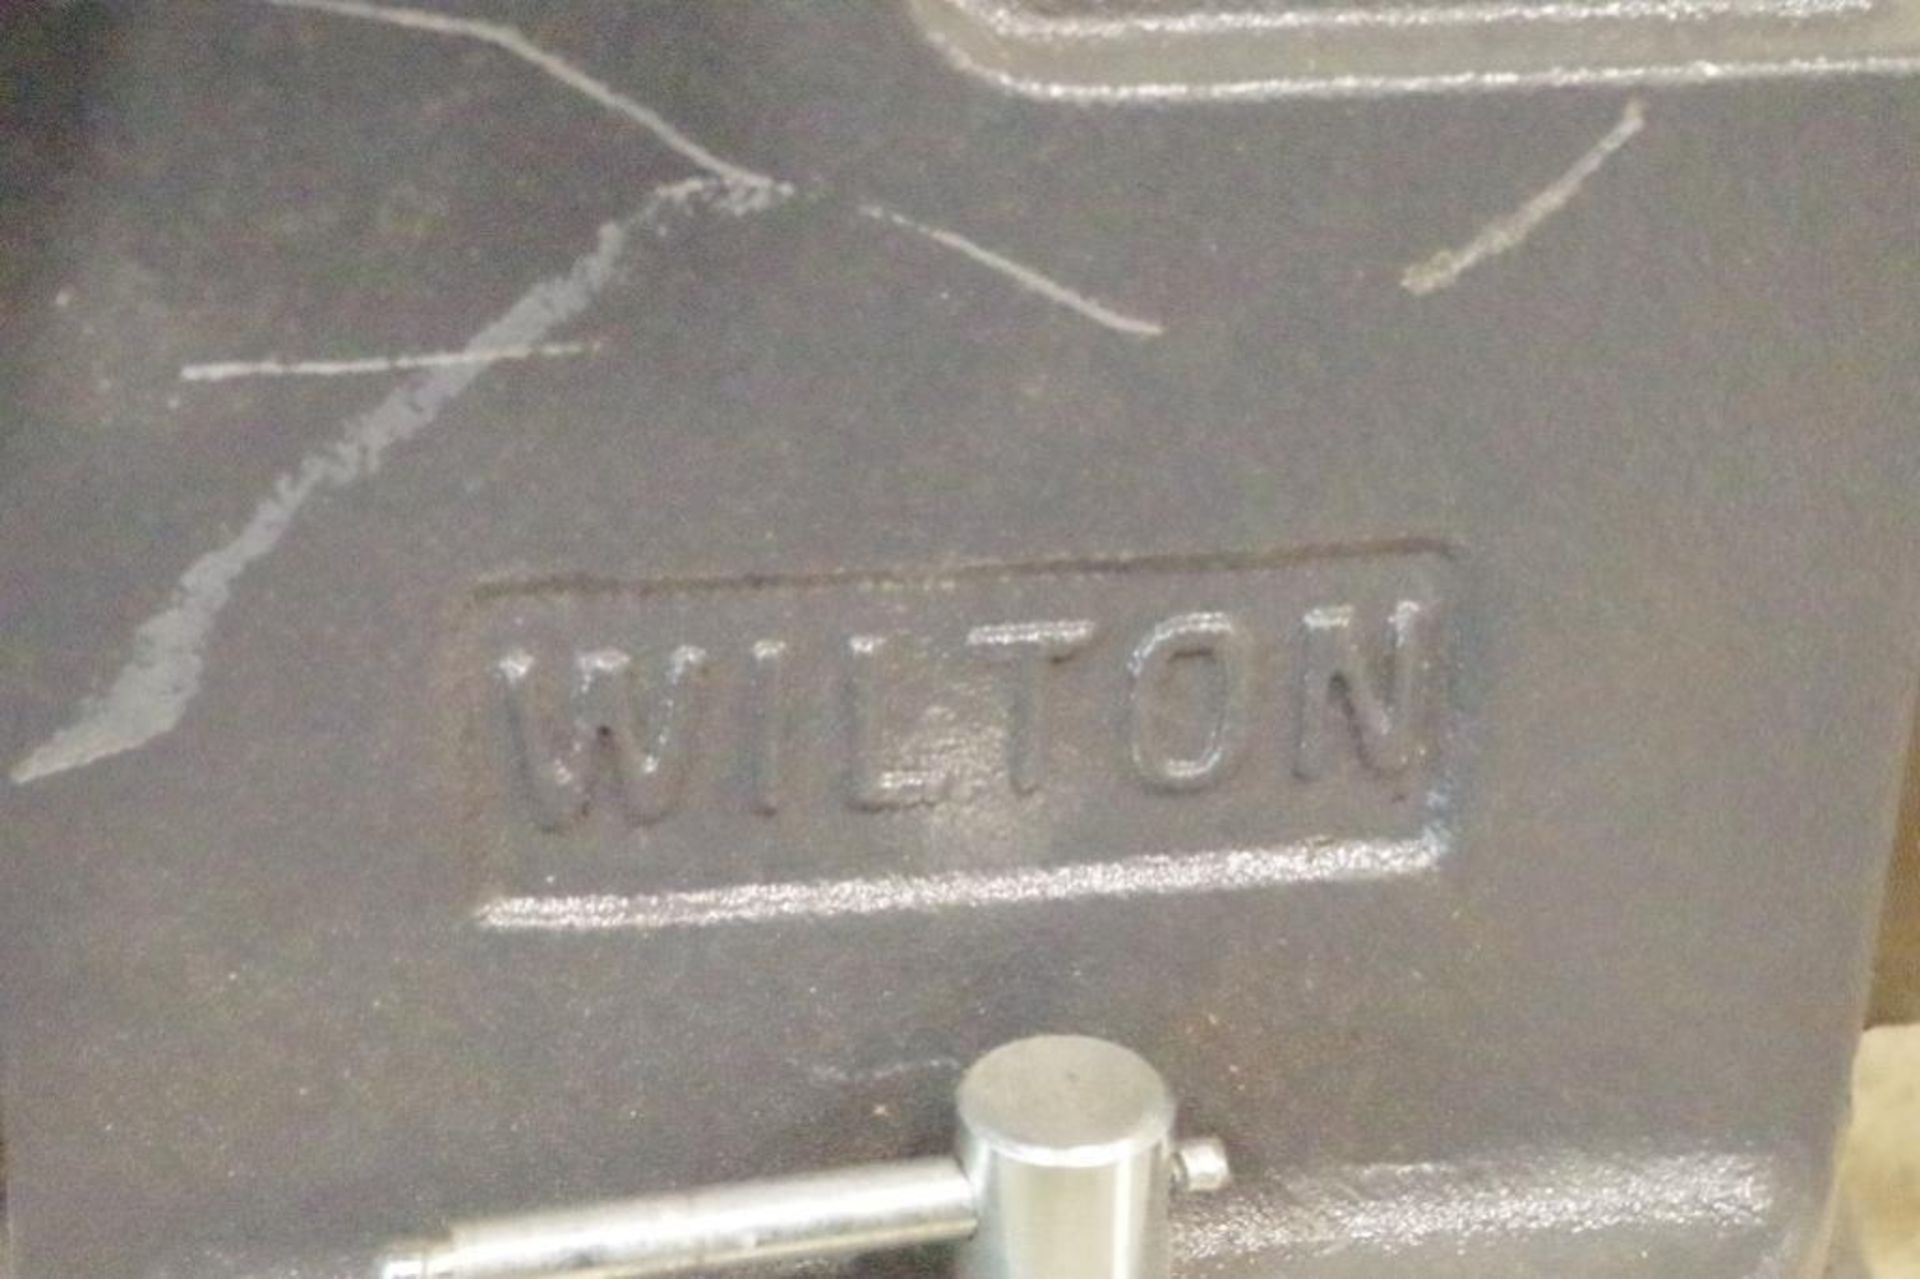 NEW WILTON Bench Vise, 8" Jaw Width - Image 3 of 6